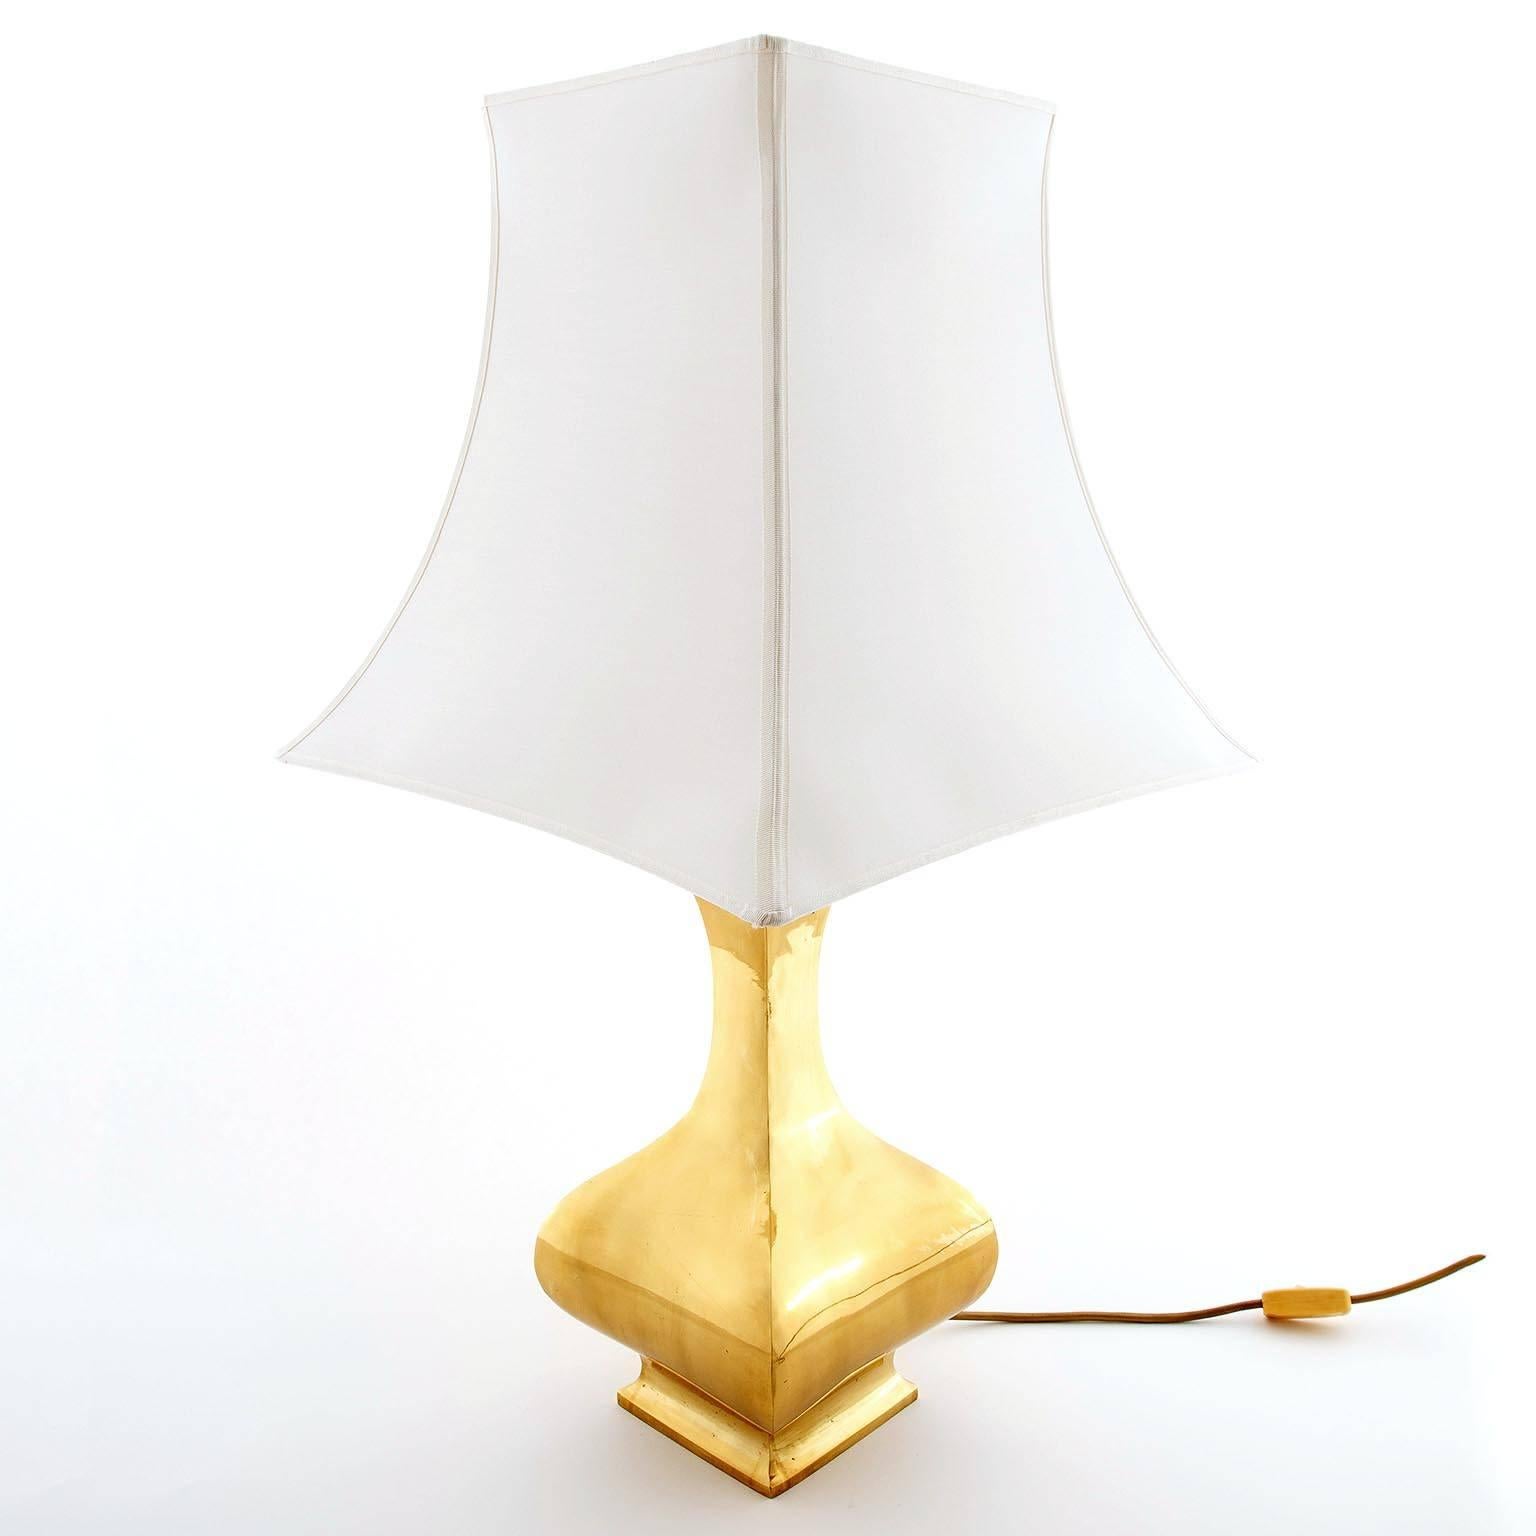 A large table lamp by French designer Maria Pergay, manufactured in Mid-Century, circa 1970. A polished solid brass stand with a newly refurbished white pagoda shaped lampshade.

It takes one medium screw base bulb.

These lights were used in the